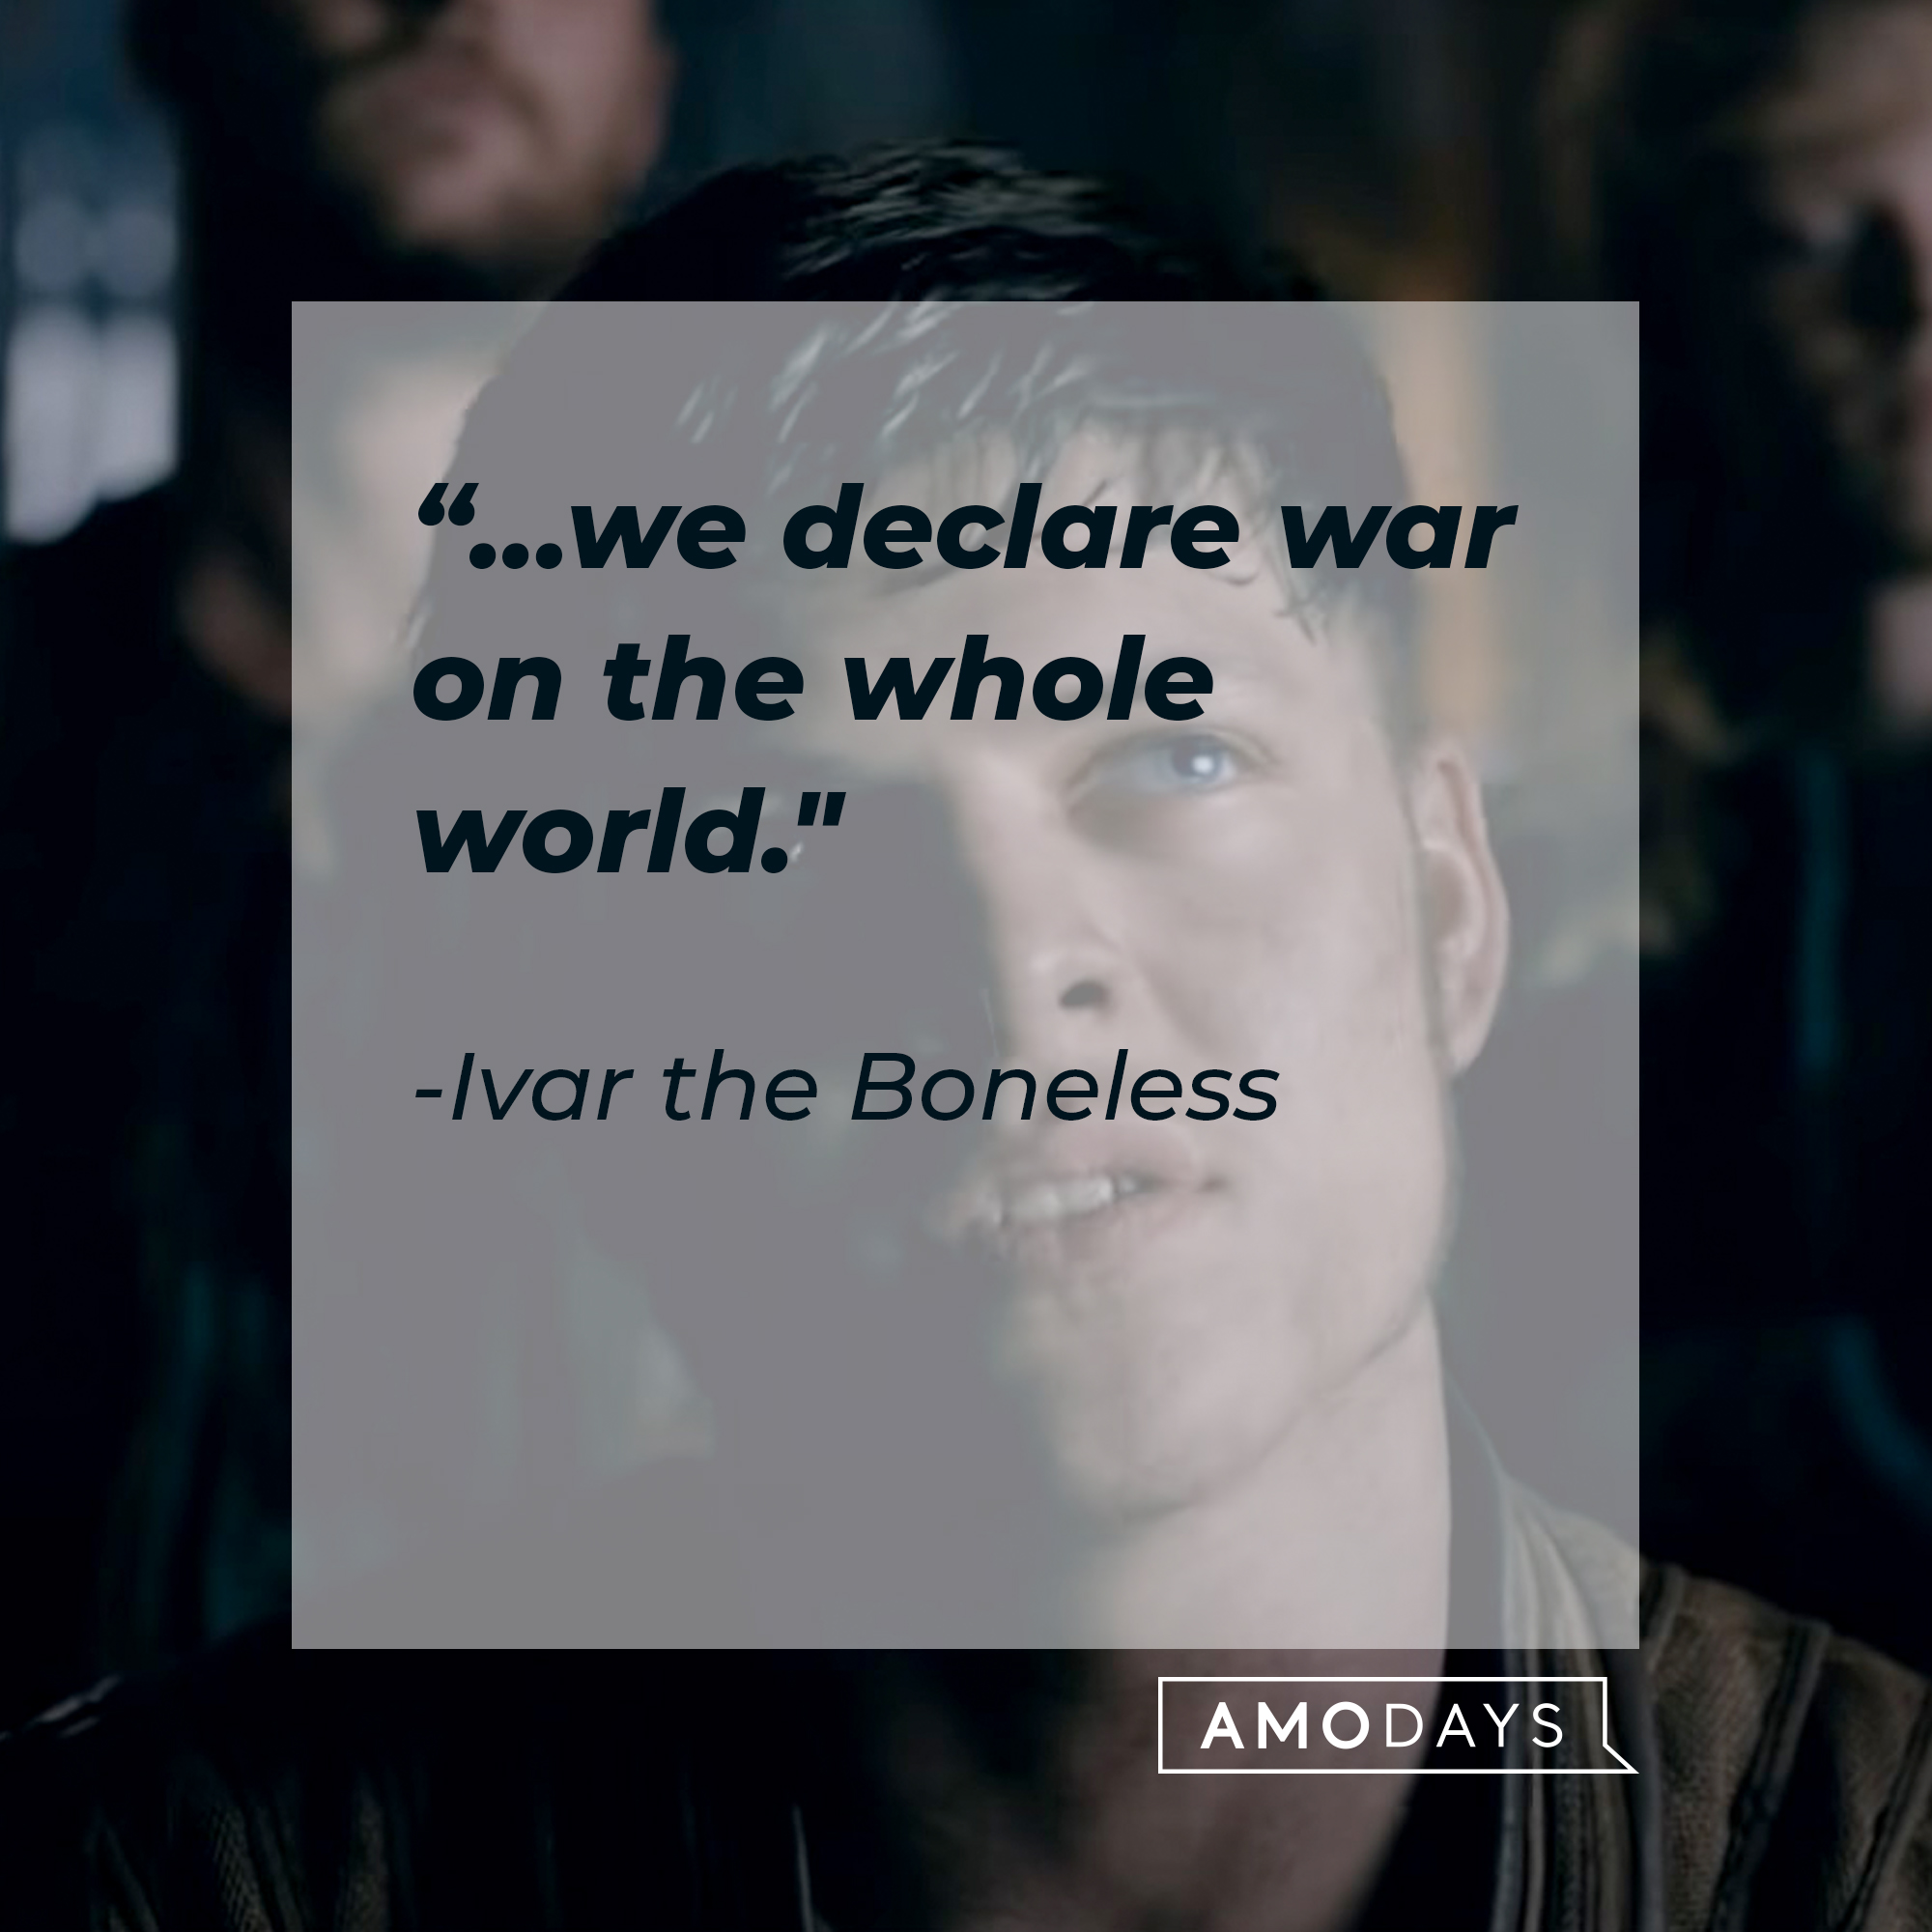 A picture of Ivar the Boneless with his quote “…we declare war on the whole world."┃Source: youtube.com/PrimeVideoUK